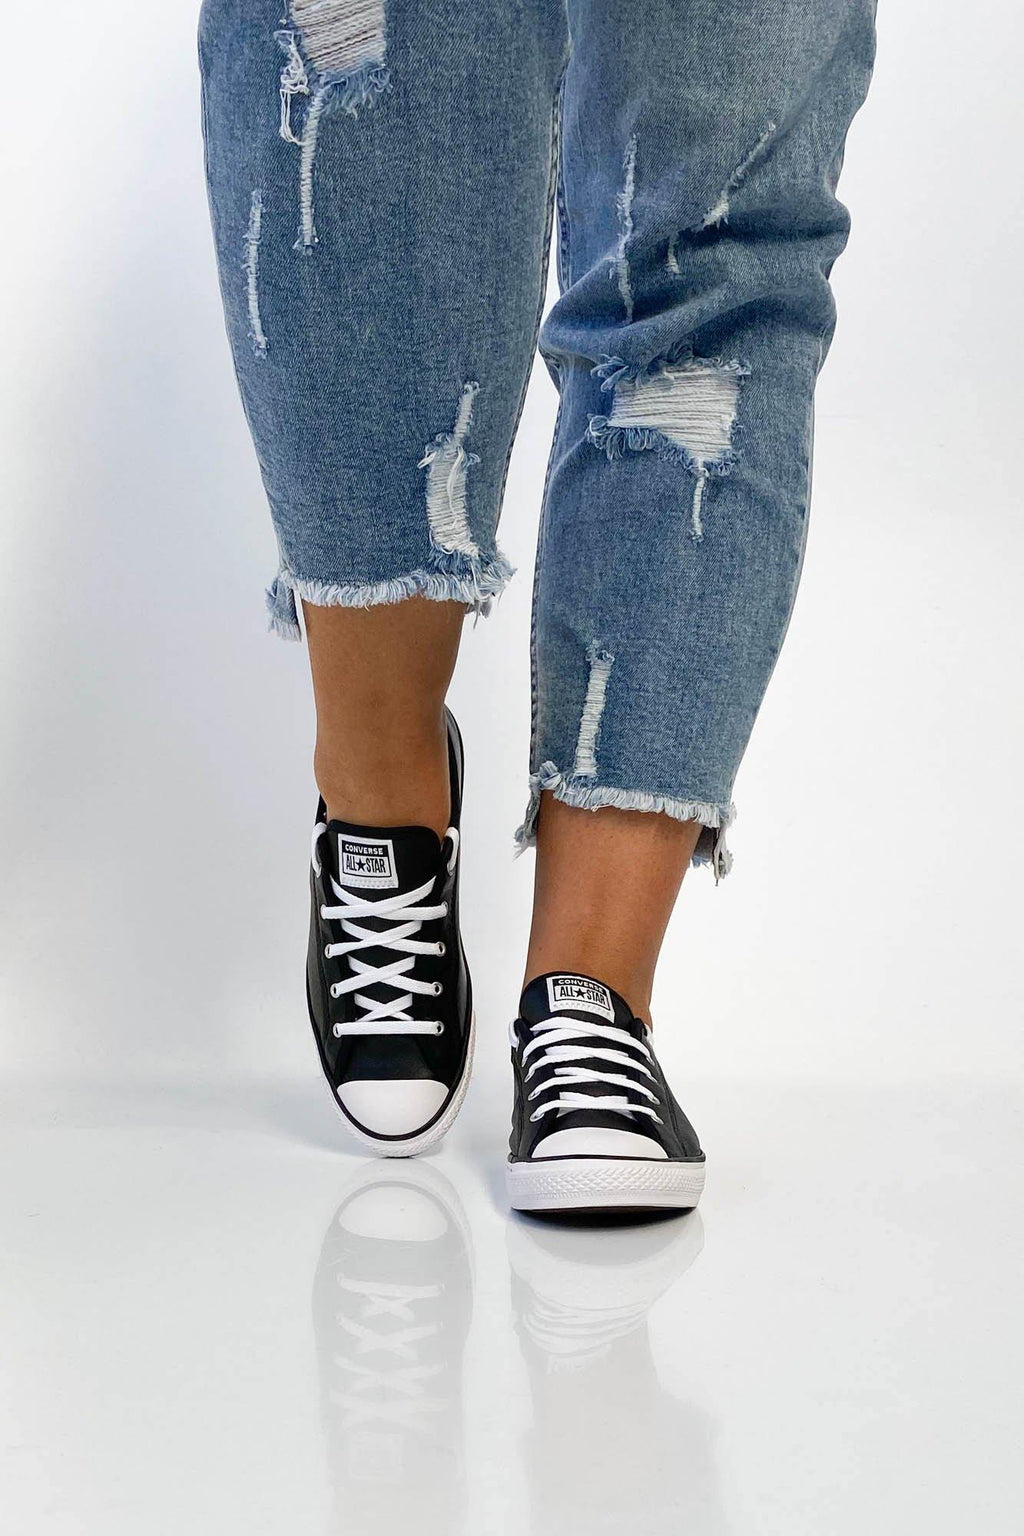 Converse Chuck Taylor Dainty Leather Low Black Shine On NZ